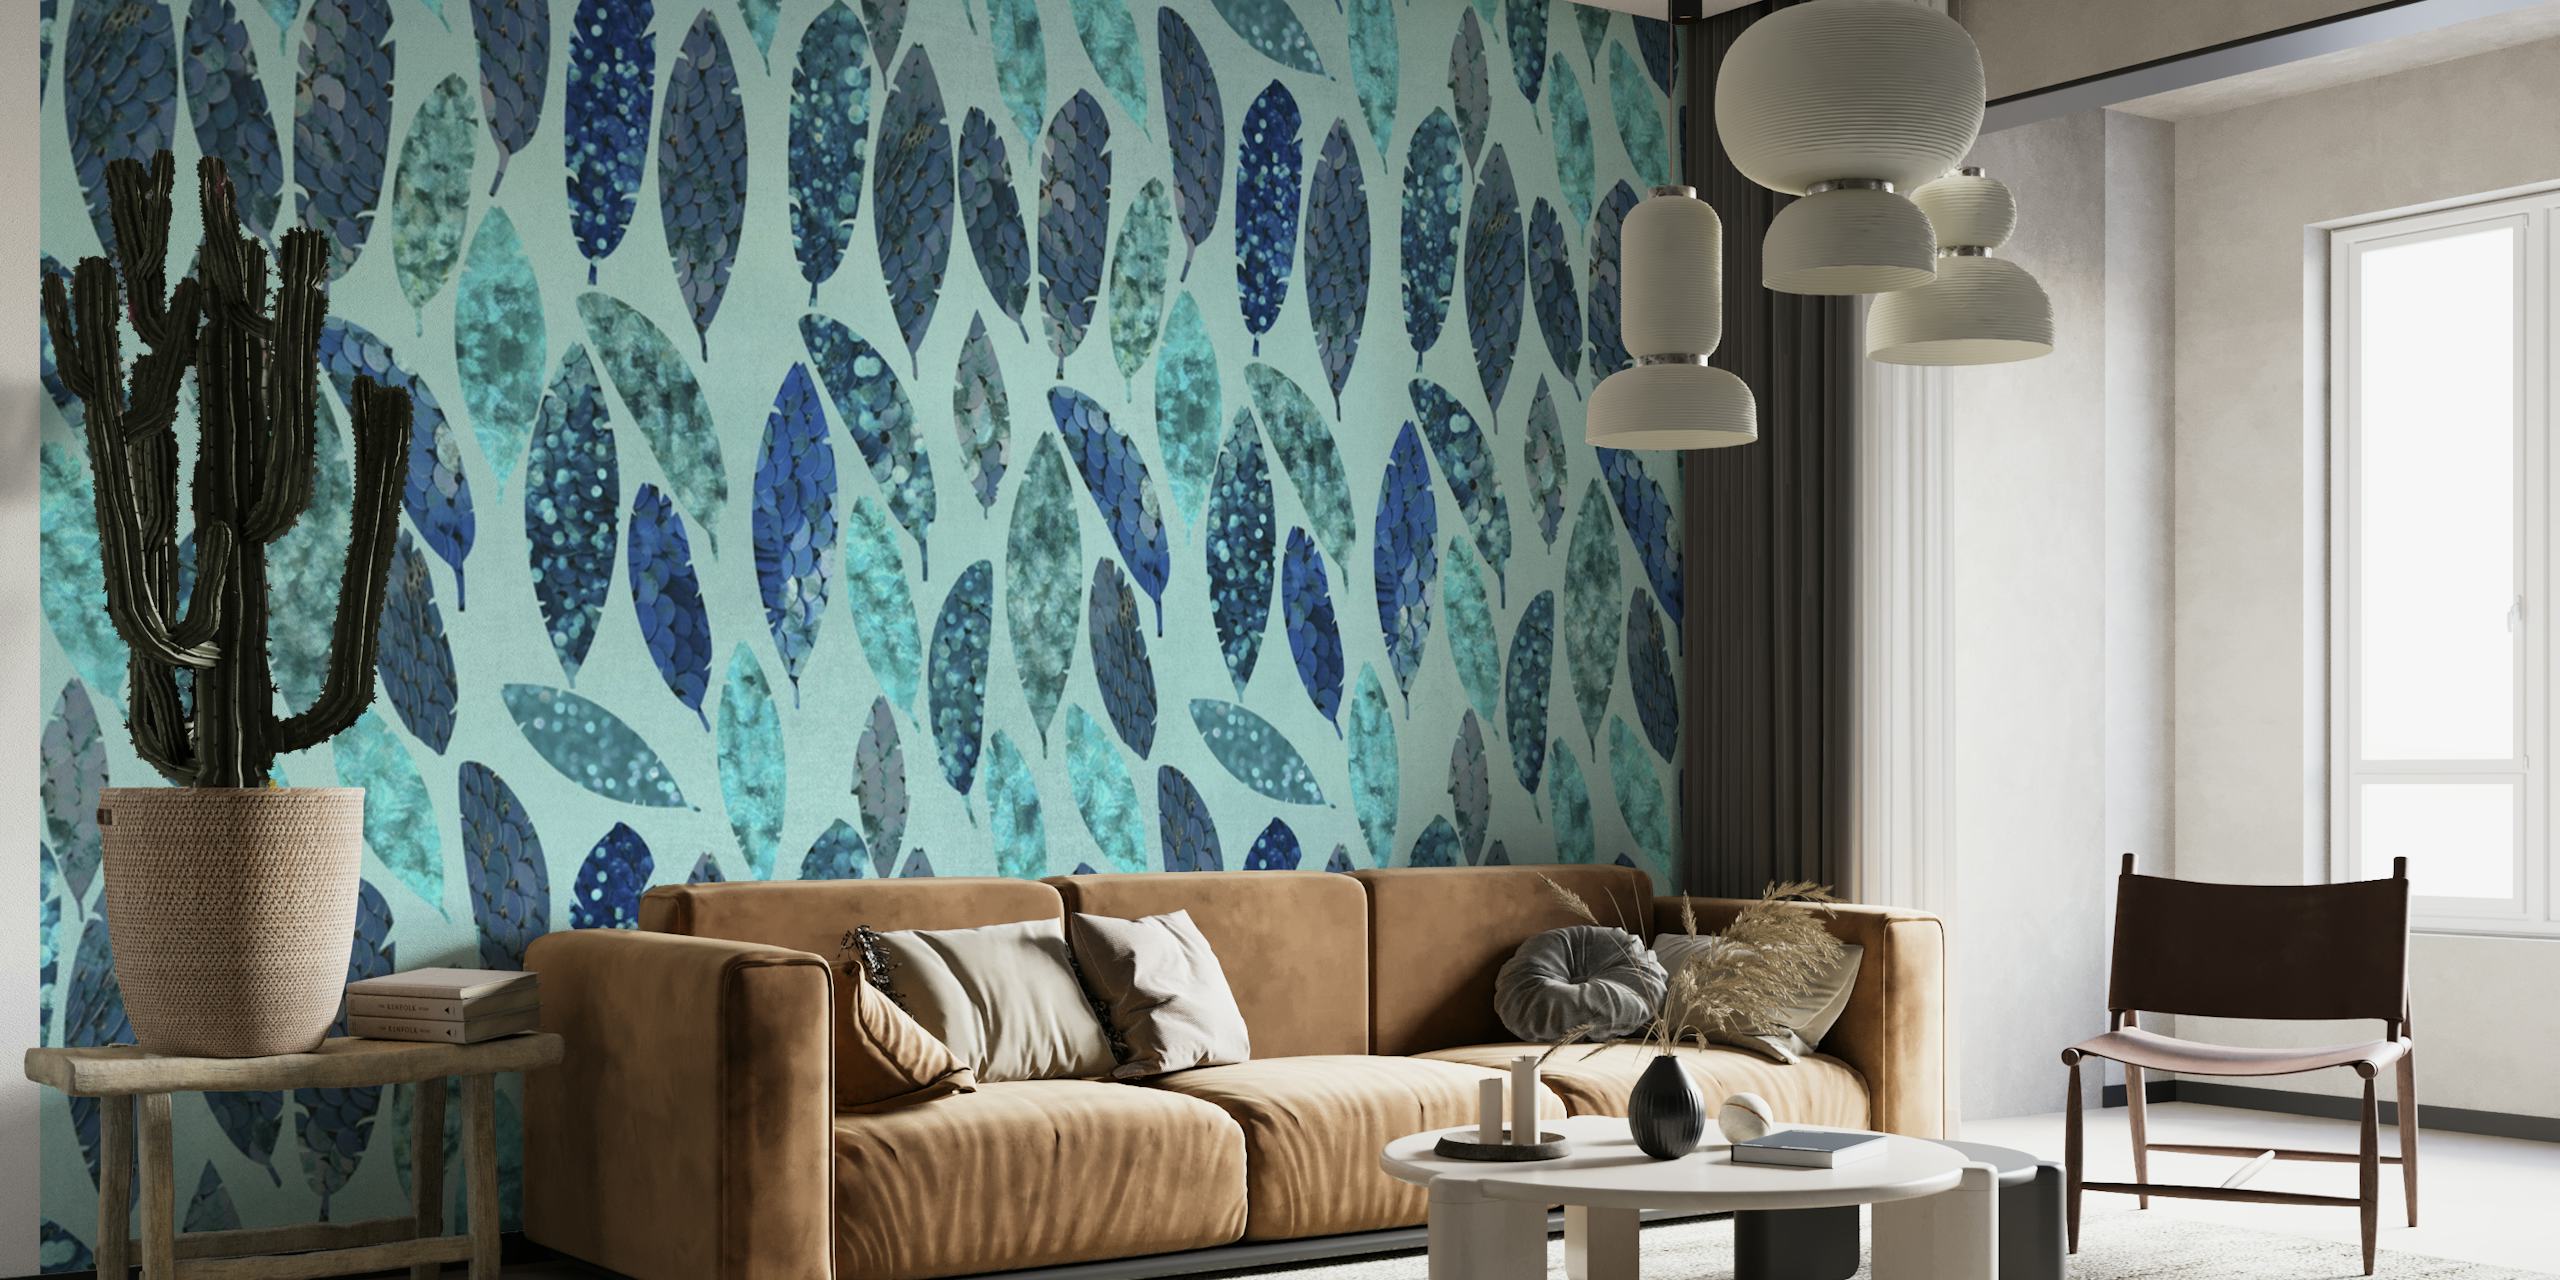 Blue Aqua Mermaid Feathers wall mural with feather-like designs in shades of blue